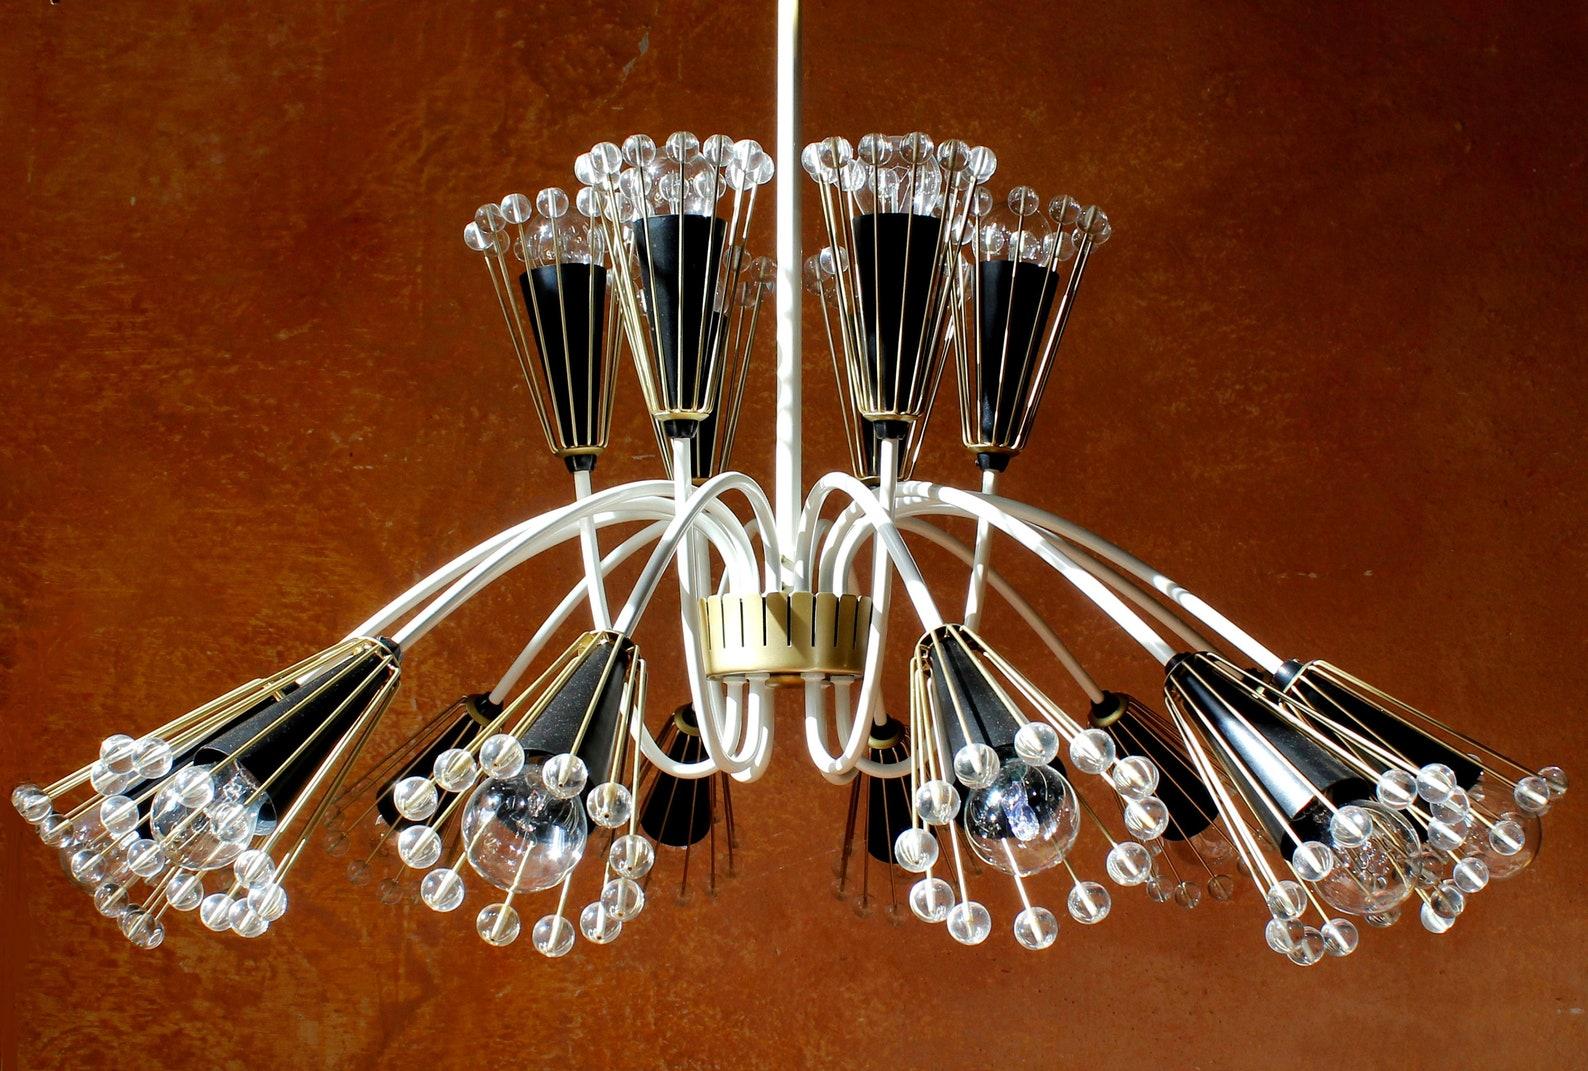 Oversized romantic 18 Lights (E27) Starburst Sputnik Chandelier. Steel Body, enameled in black, warm white & gold nuances with 216 (+4) Glass Pearls. 

Object description: gigantic chandelier in white, black & gold enamel, 18 lights (e27) with 216